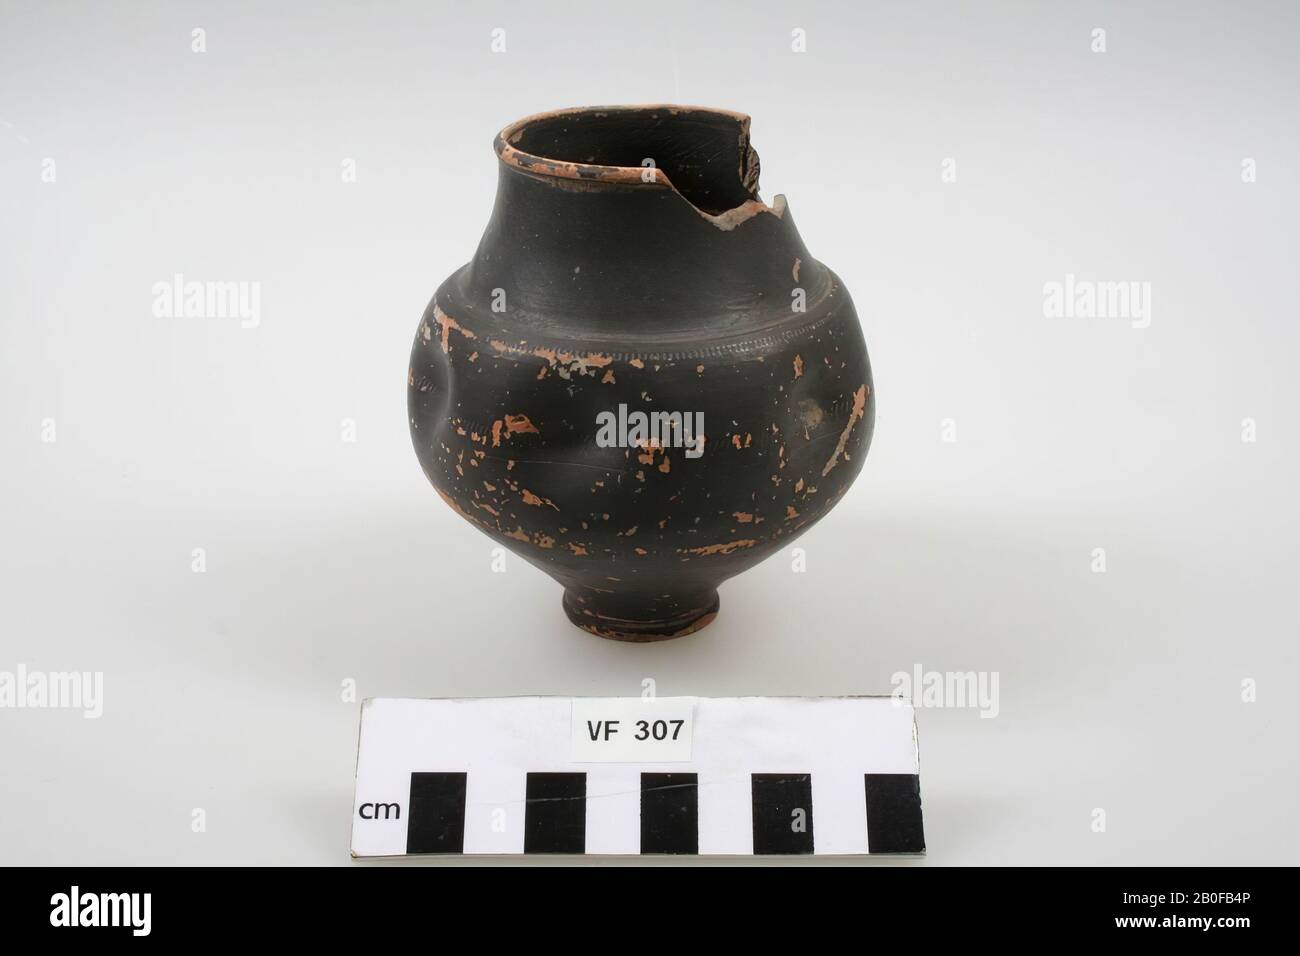 Black lacquered cup of convex shape with high edge, narrow flat foot and squeezed wall. Part of the rim and neck is missing, the paint layer is partially peeled off., Cup, dented cup, earthenware, h: 10.5 cm, diam: 9.2 cm, roman, Netherlands, Utrecht, Bunnik, Fighting Stock Photo